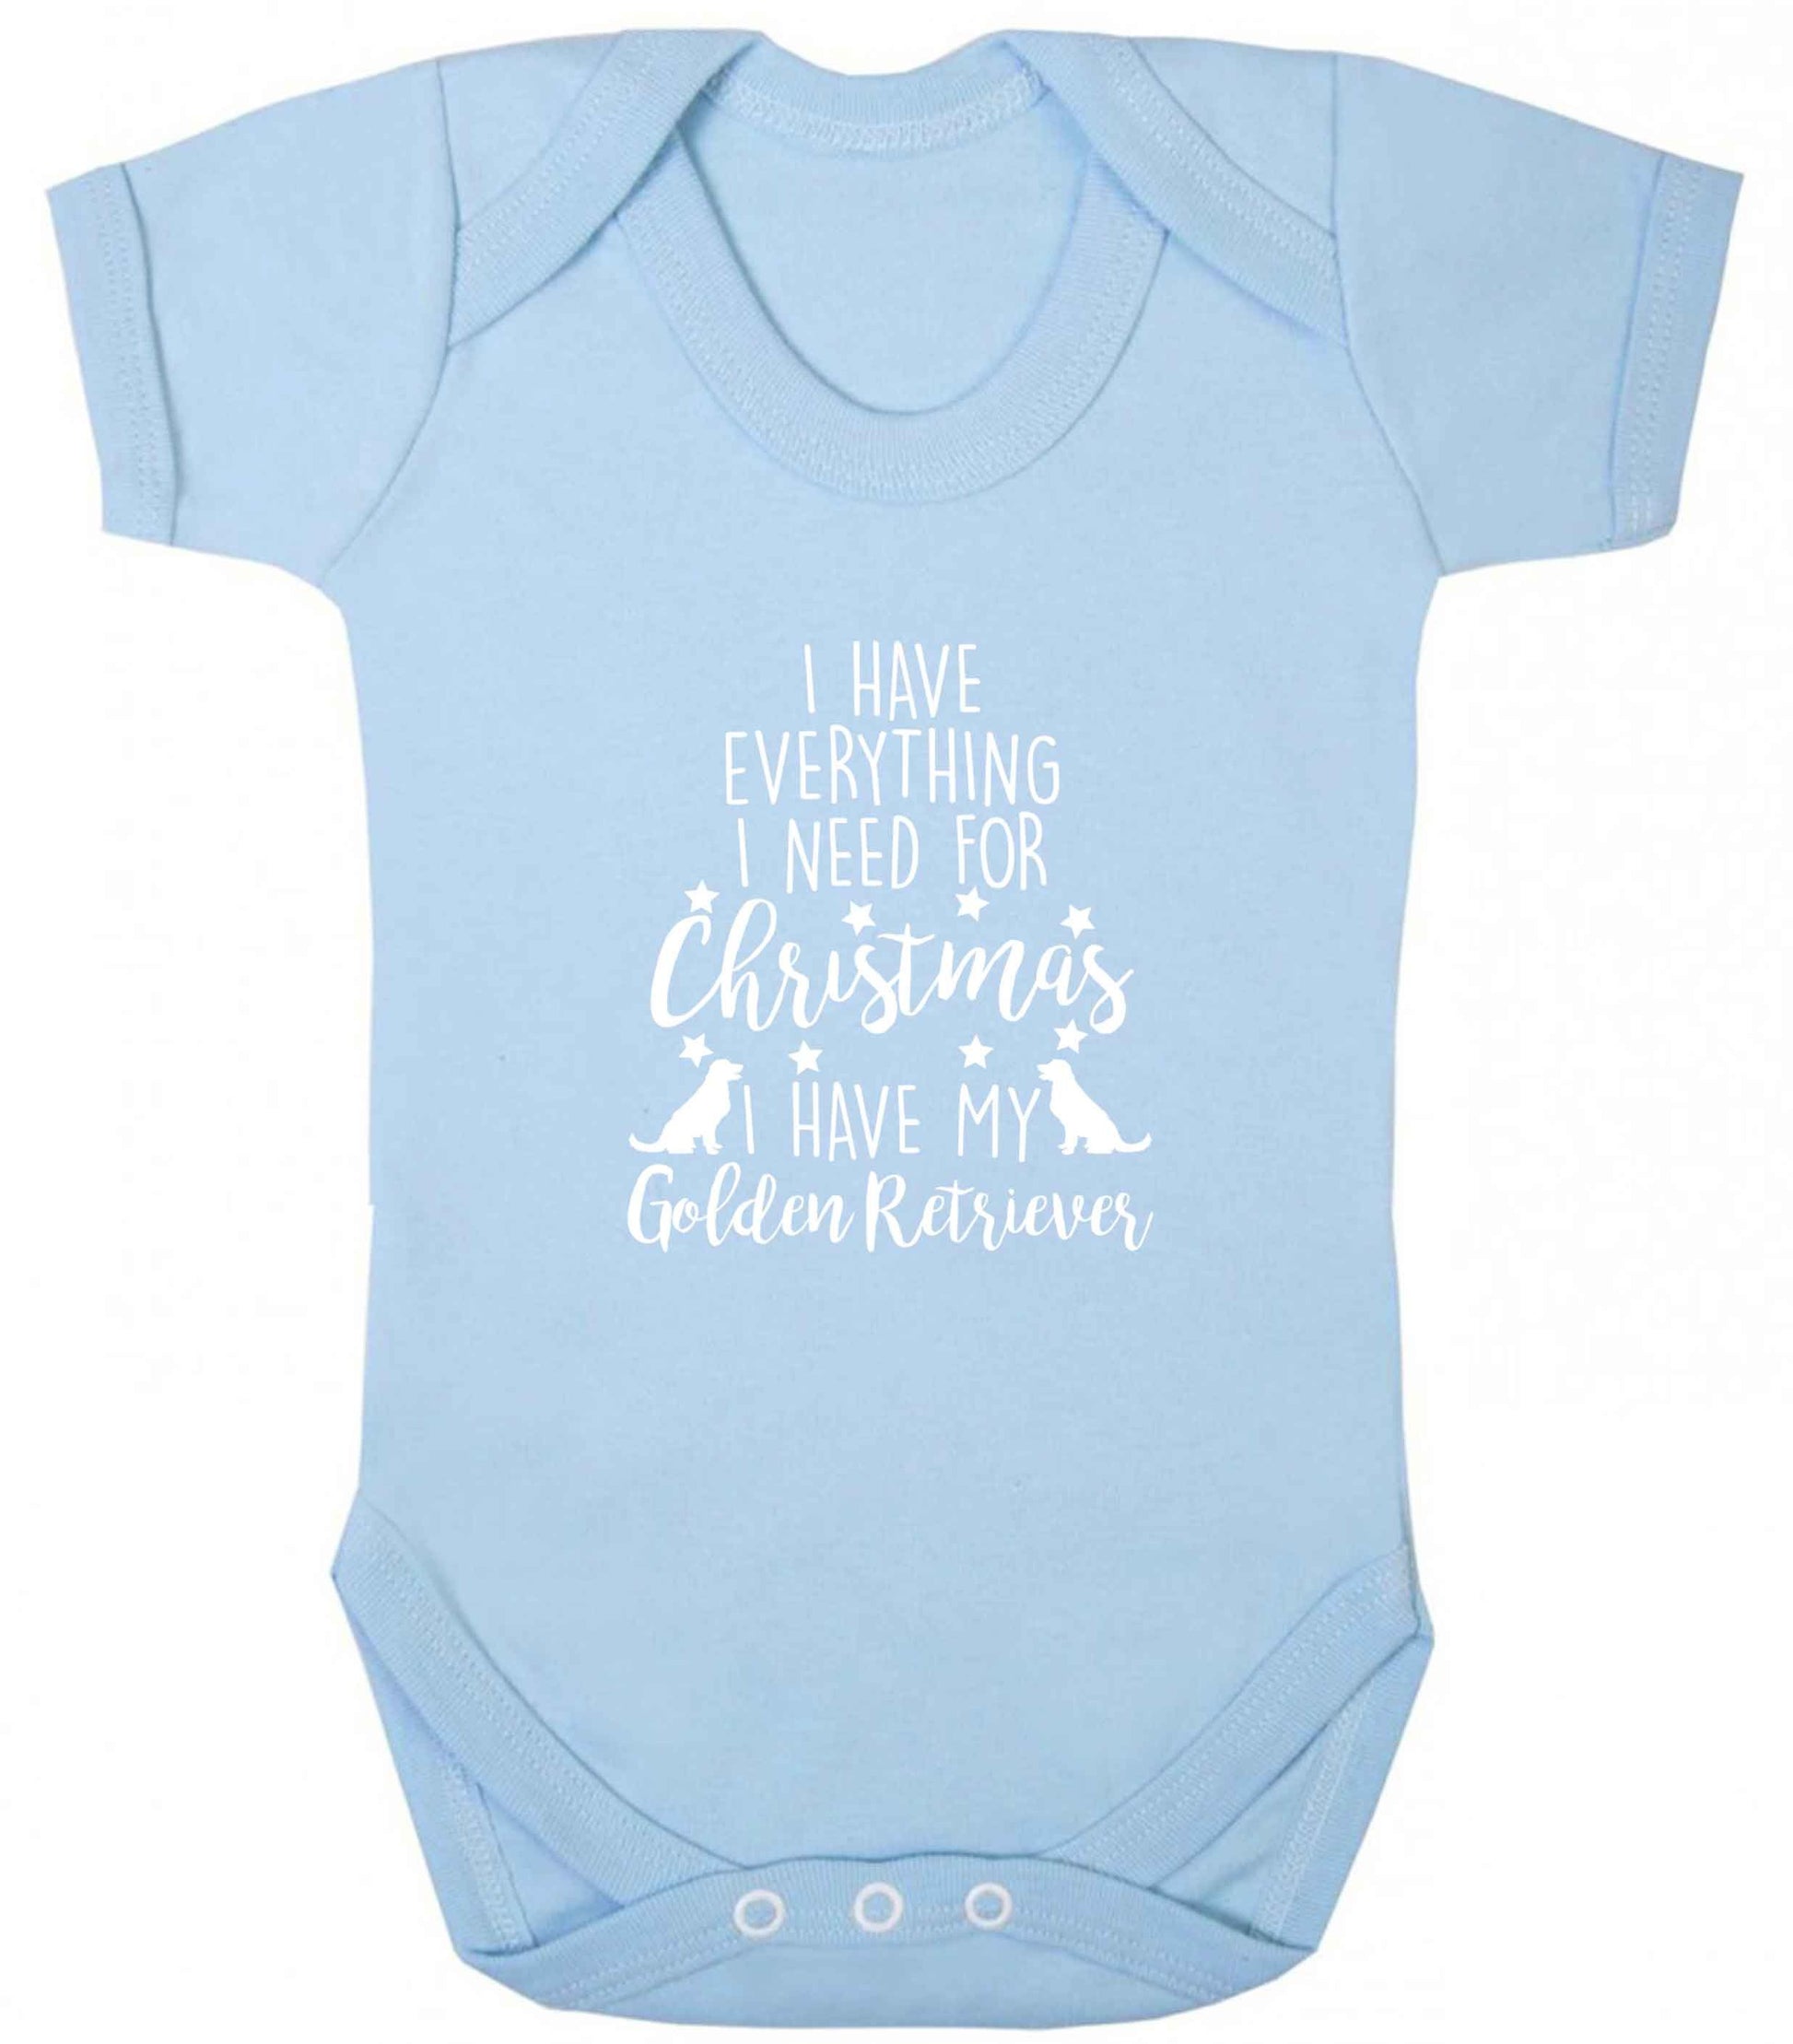 I have everything I need for Christmas I have my golden retriever baby vest pale blue 18-24 months